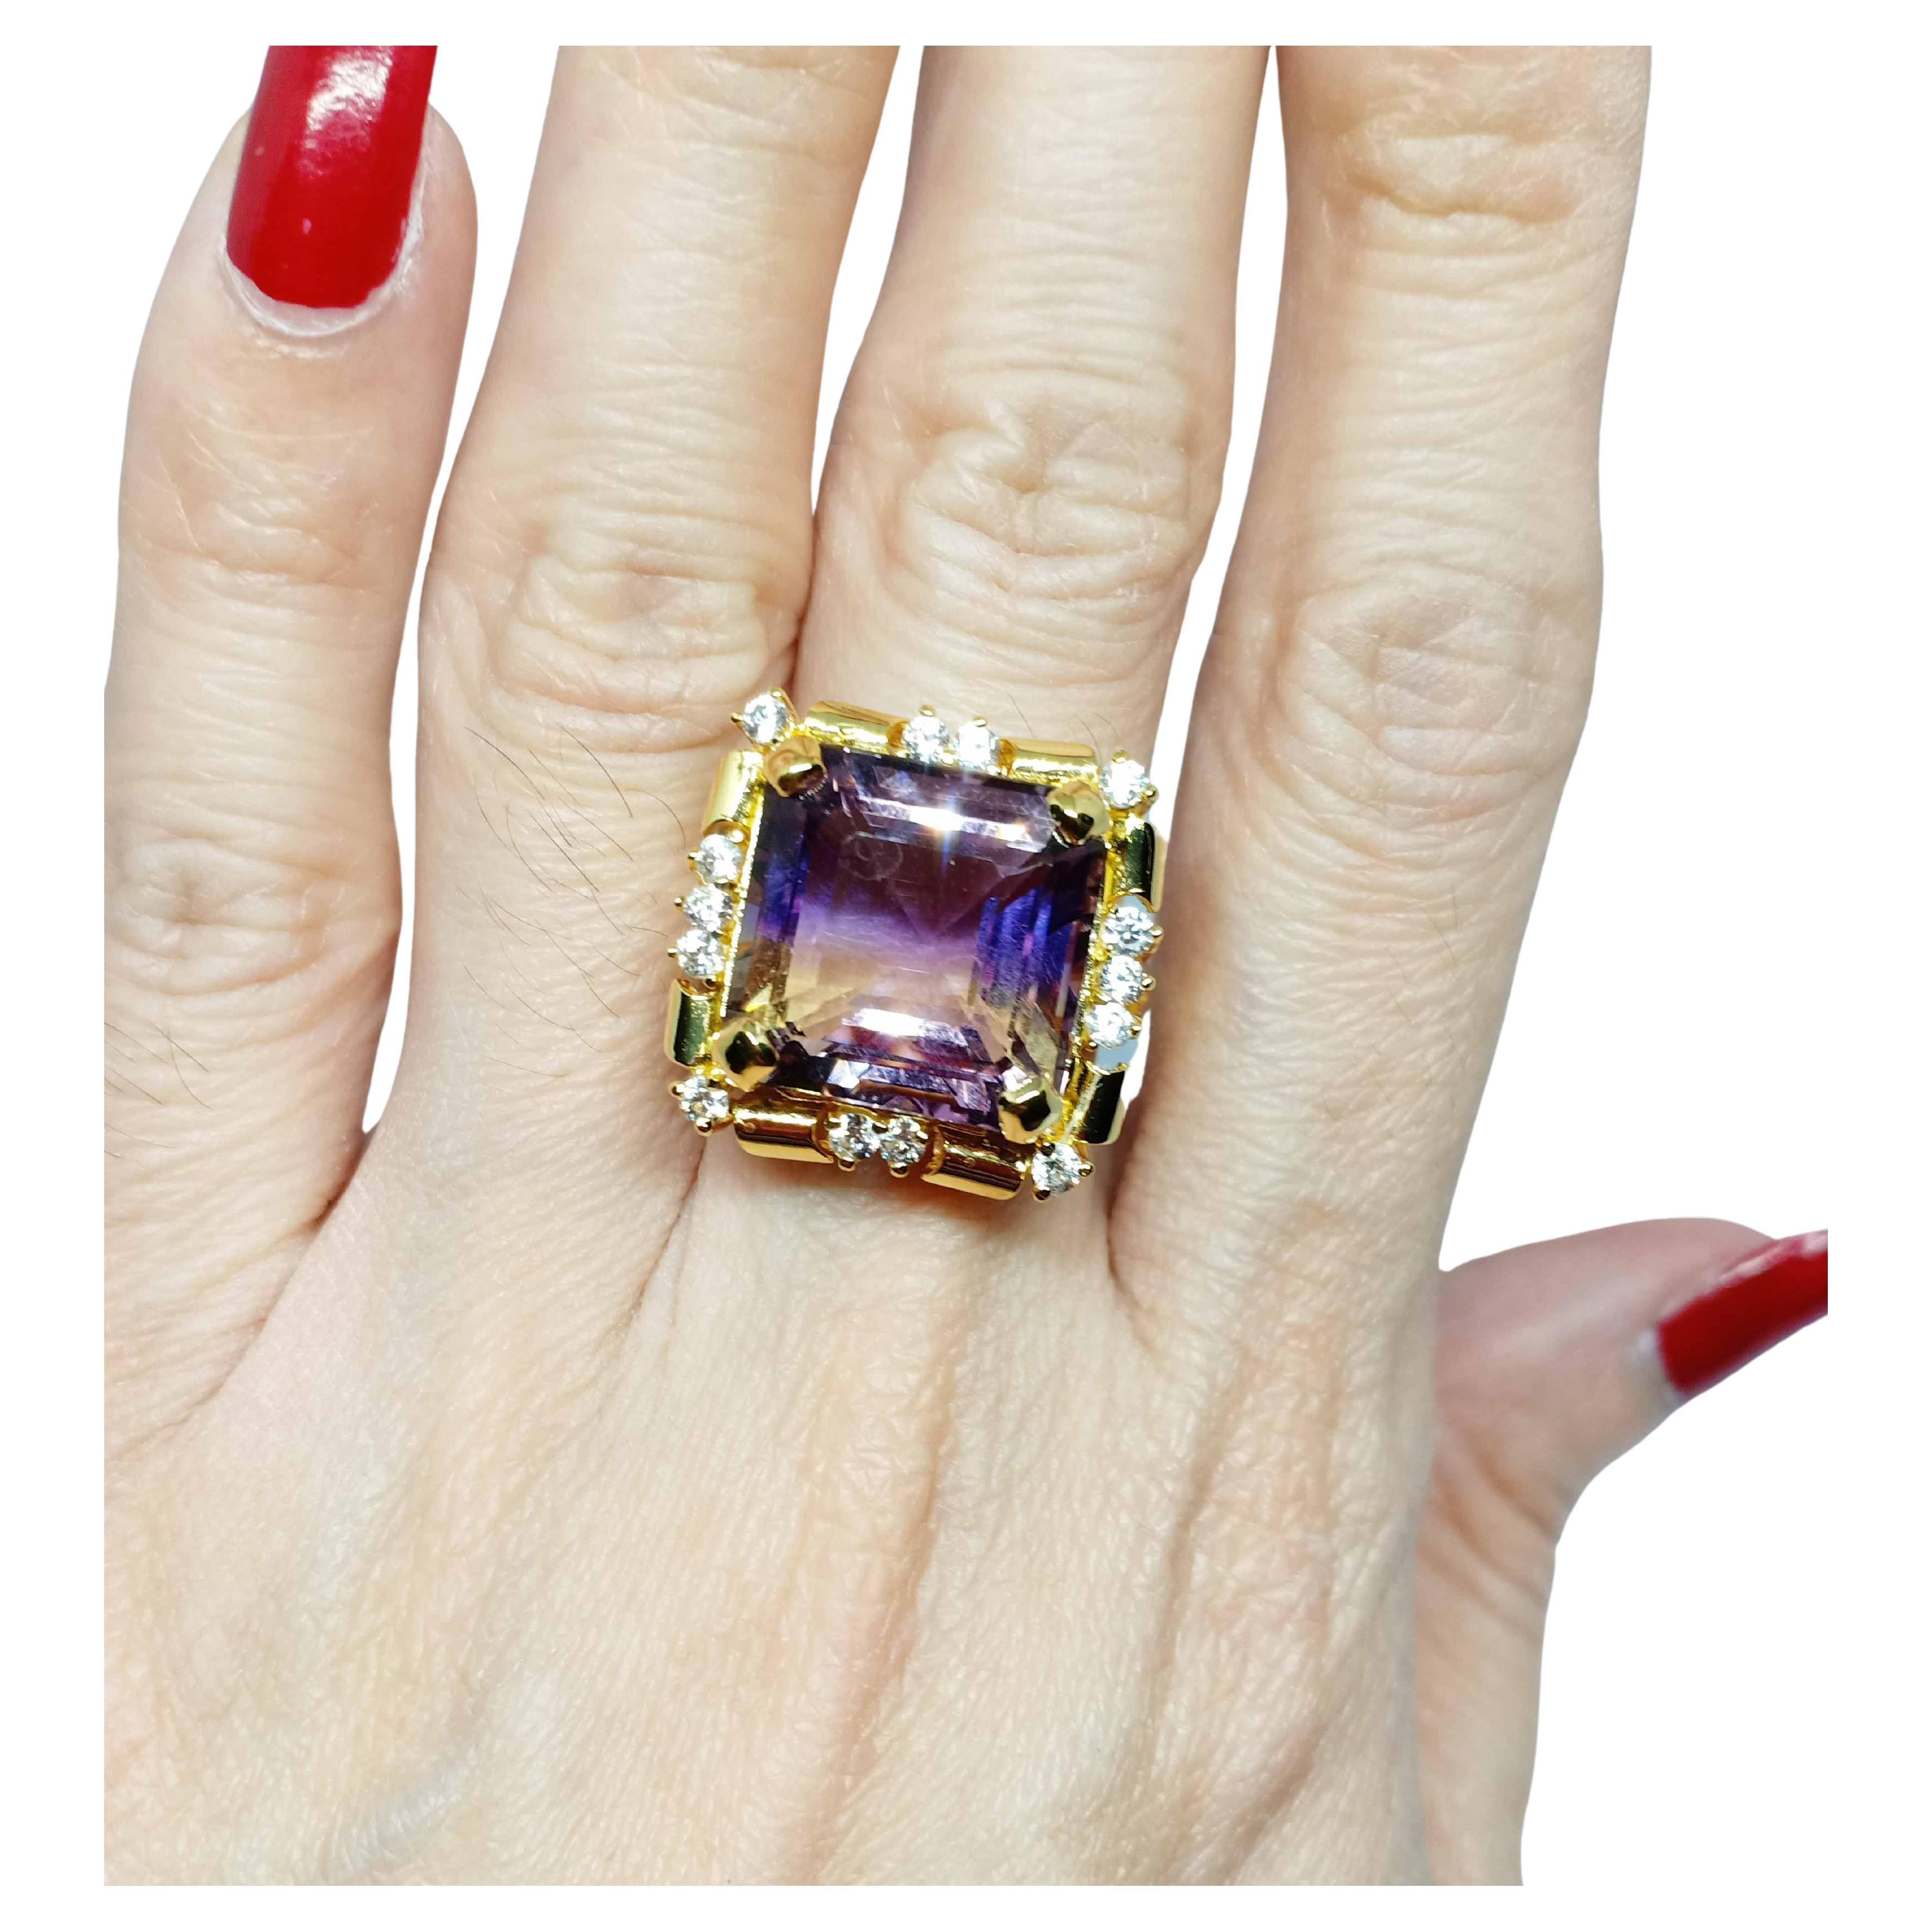 (Big ring)Ametrine Ring(12.79cts) sterling silver on 18K Gold Plated. For Sale